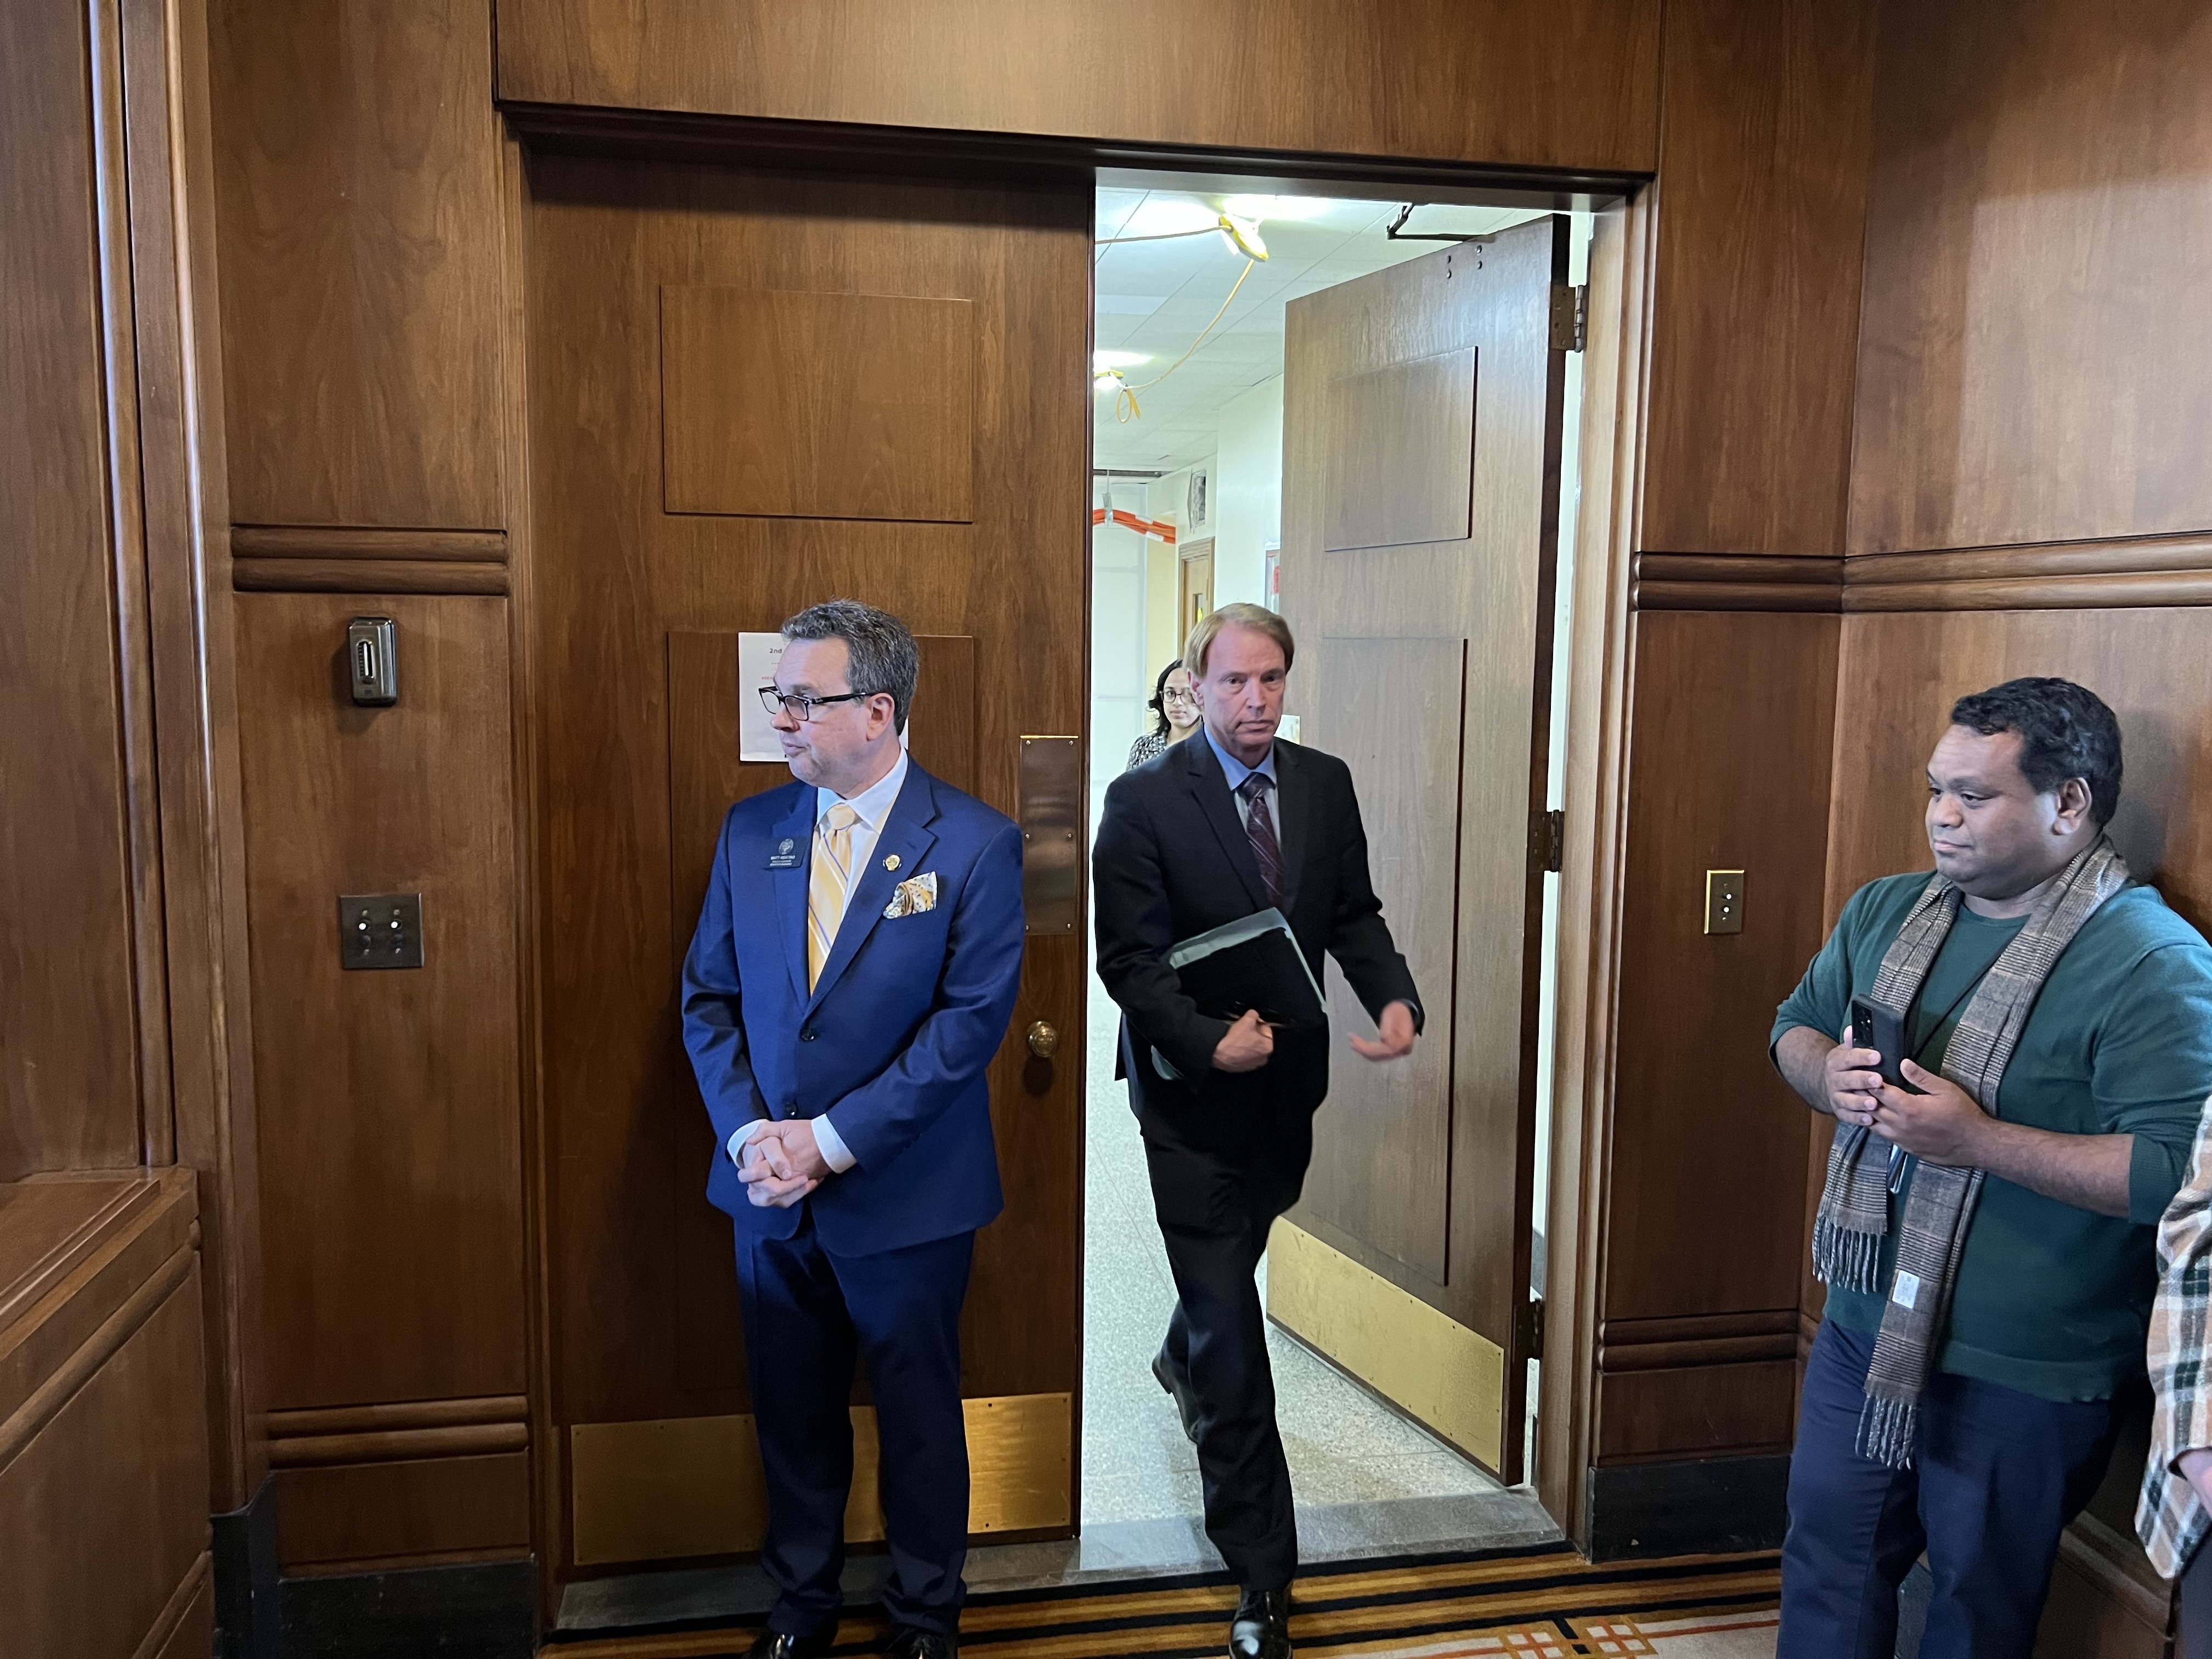 Senate Minority Leader Tim Knopp, R-Bend, returns to the Oregon Senate on June 15, 2023. Knopp led his party in a six-week walkout of the chamber that ended in a wide-ranging deal.